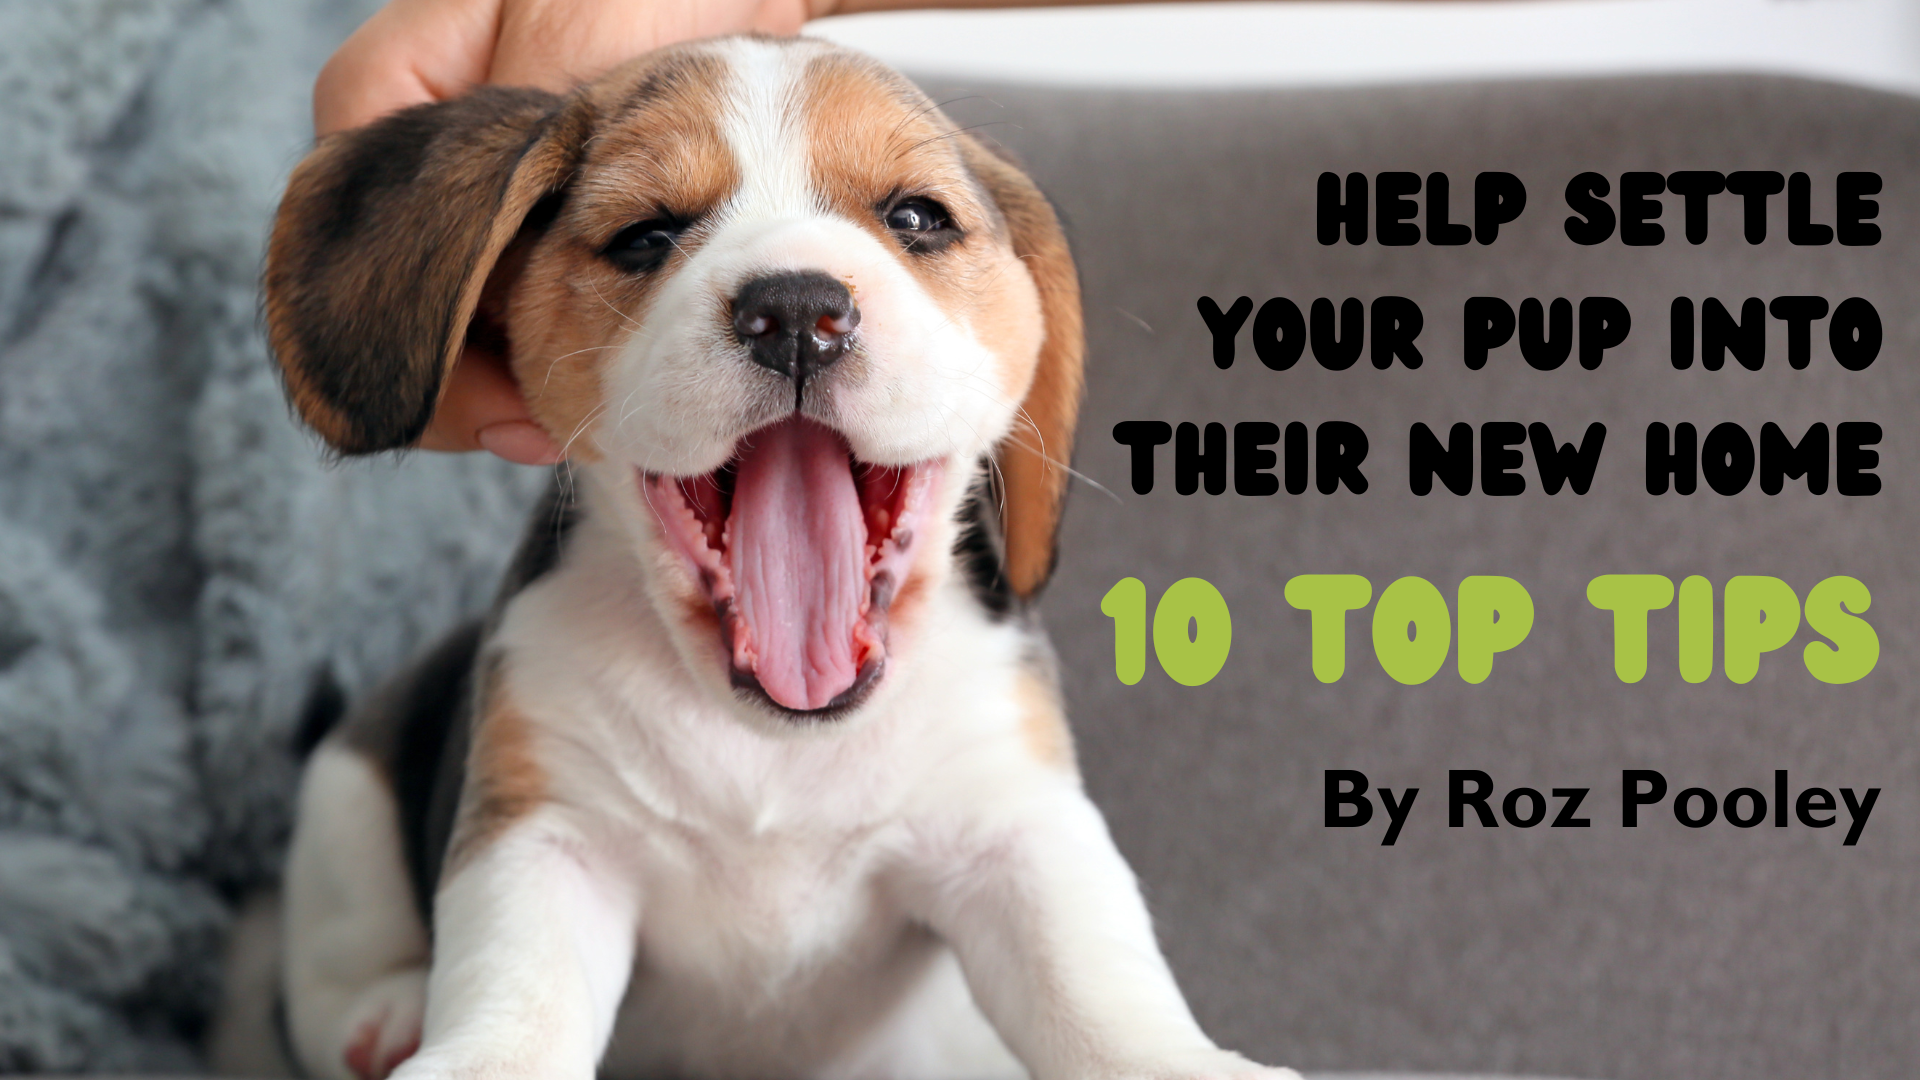 Helping your puppy settle into the home